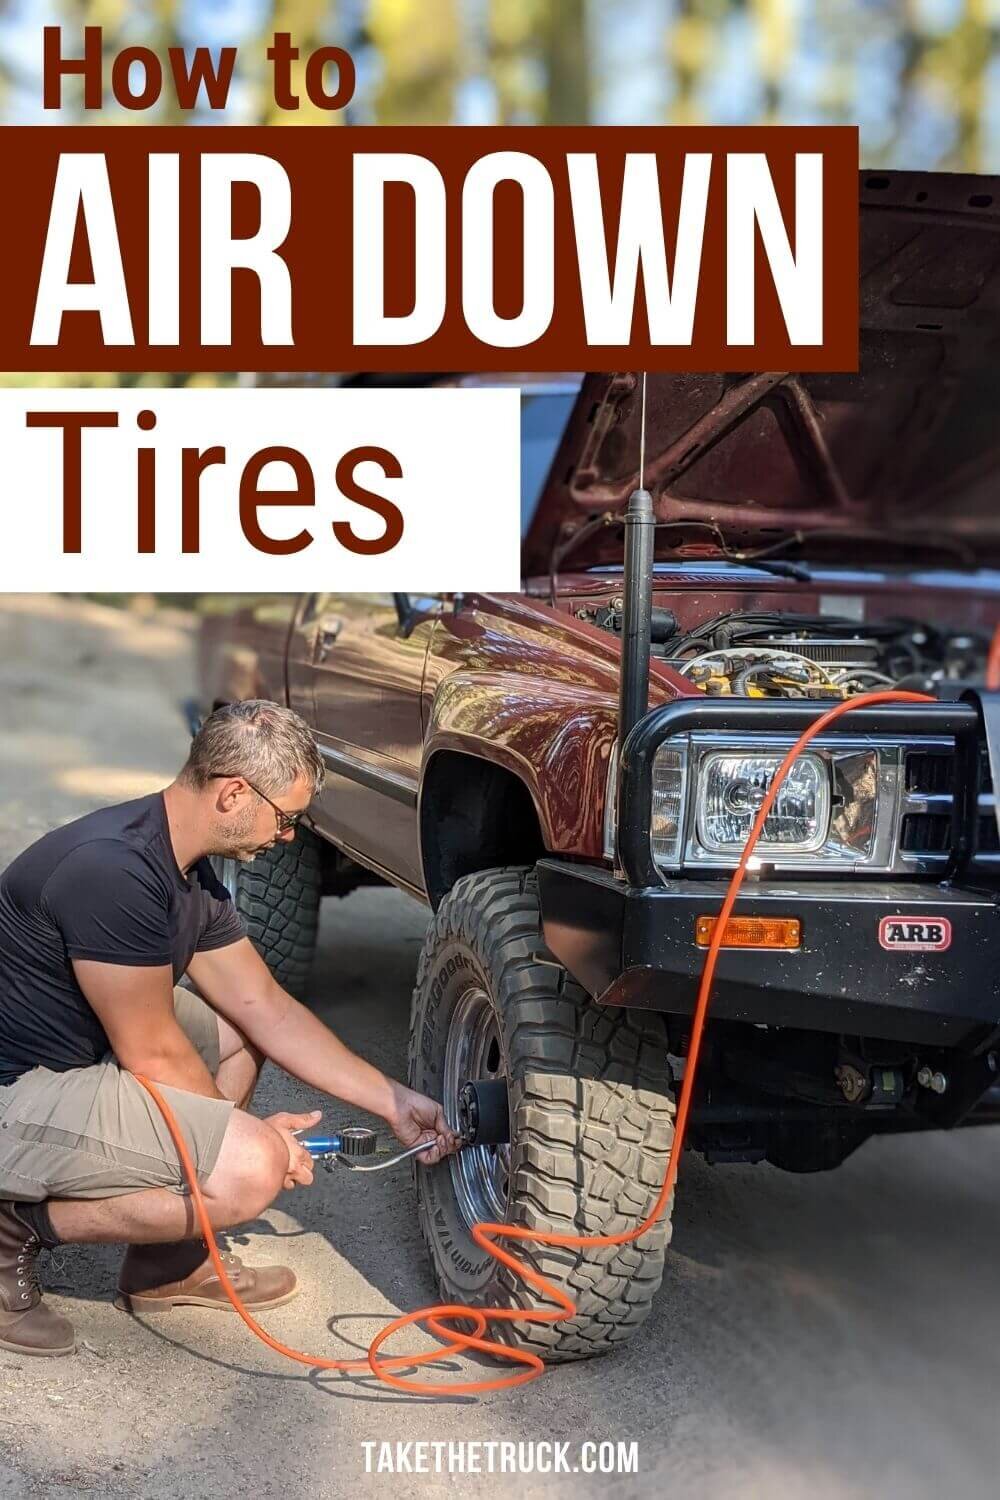 Everything about how to air down tires. Airing down off road tires or overland tires will improve your experience! Plus tool recommendations for airing down tires like off road air compressors. 